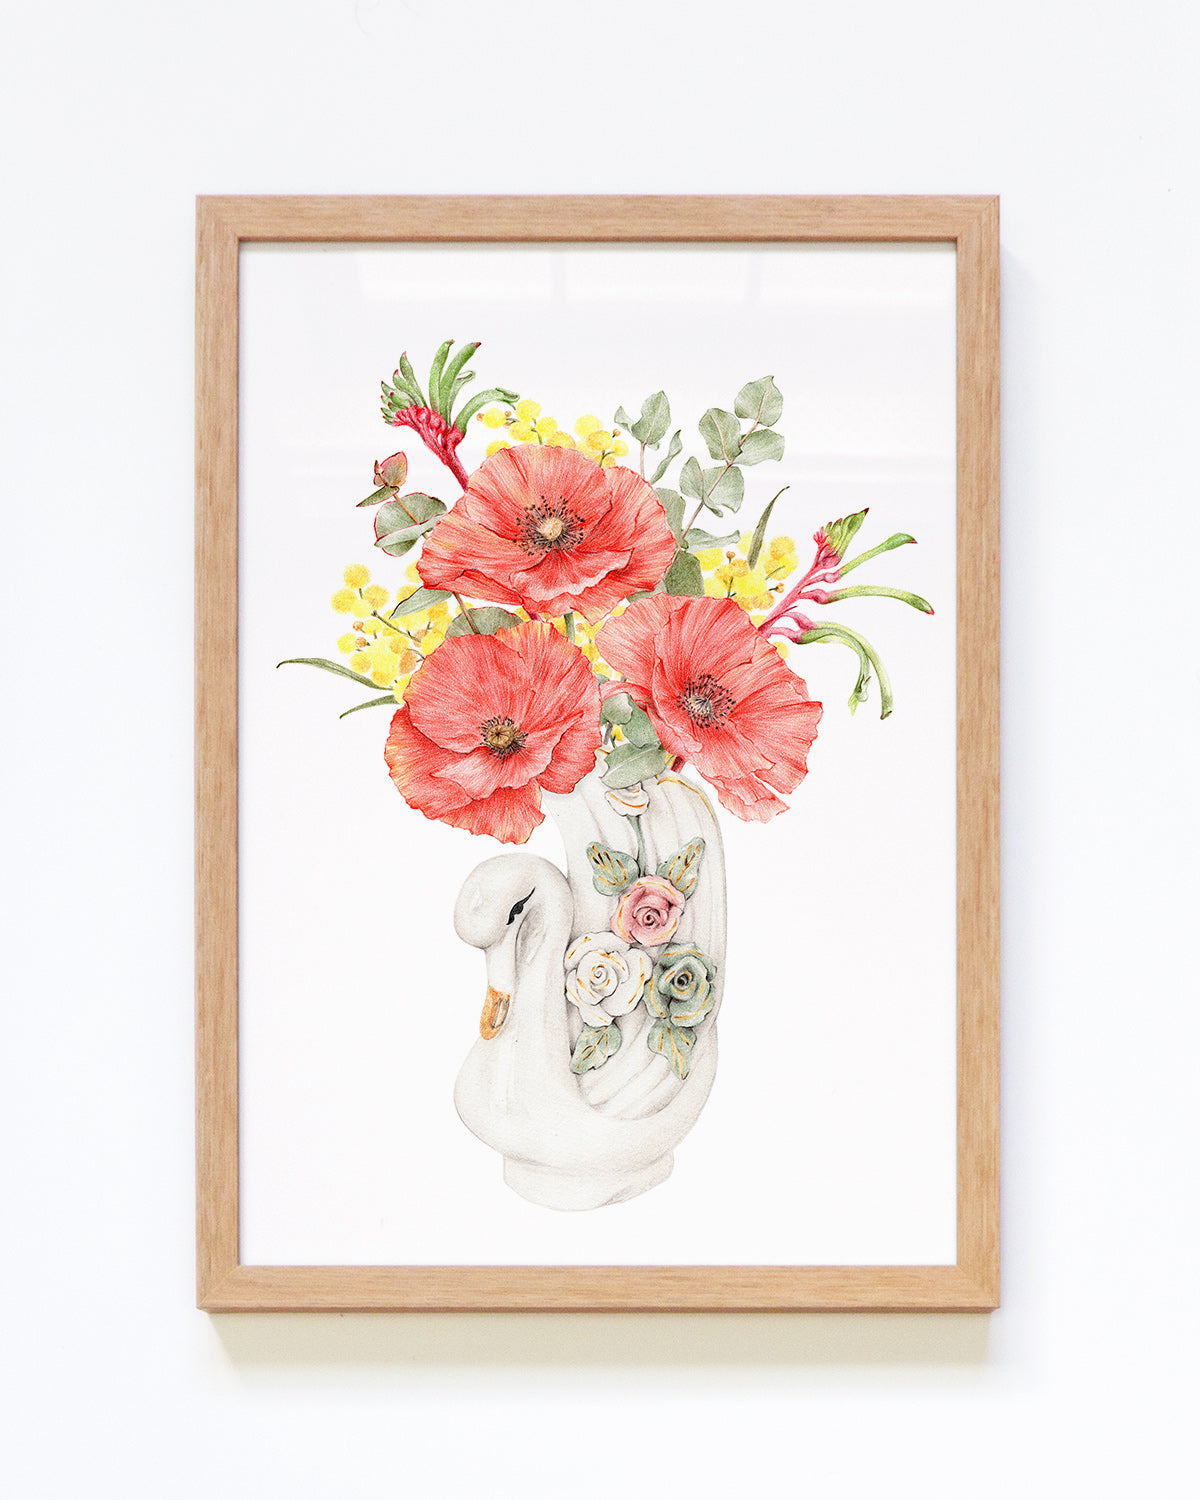 Framed botanical art print with poppies